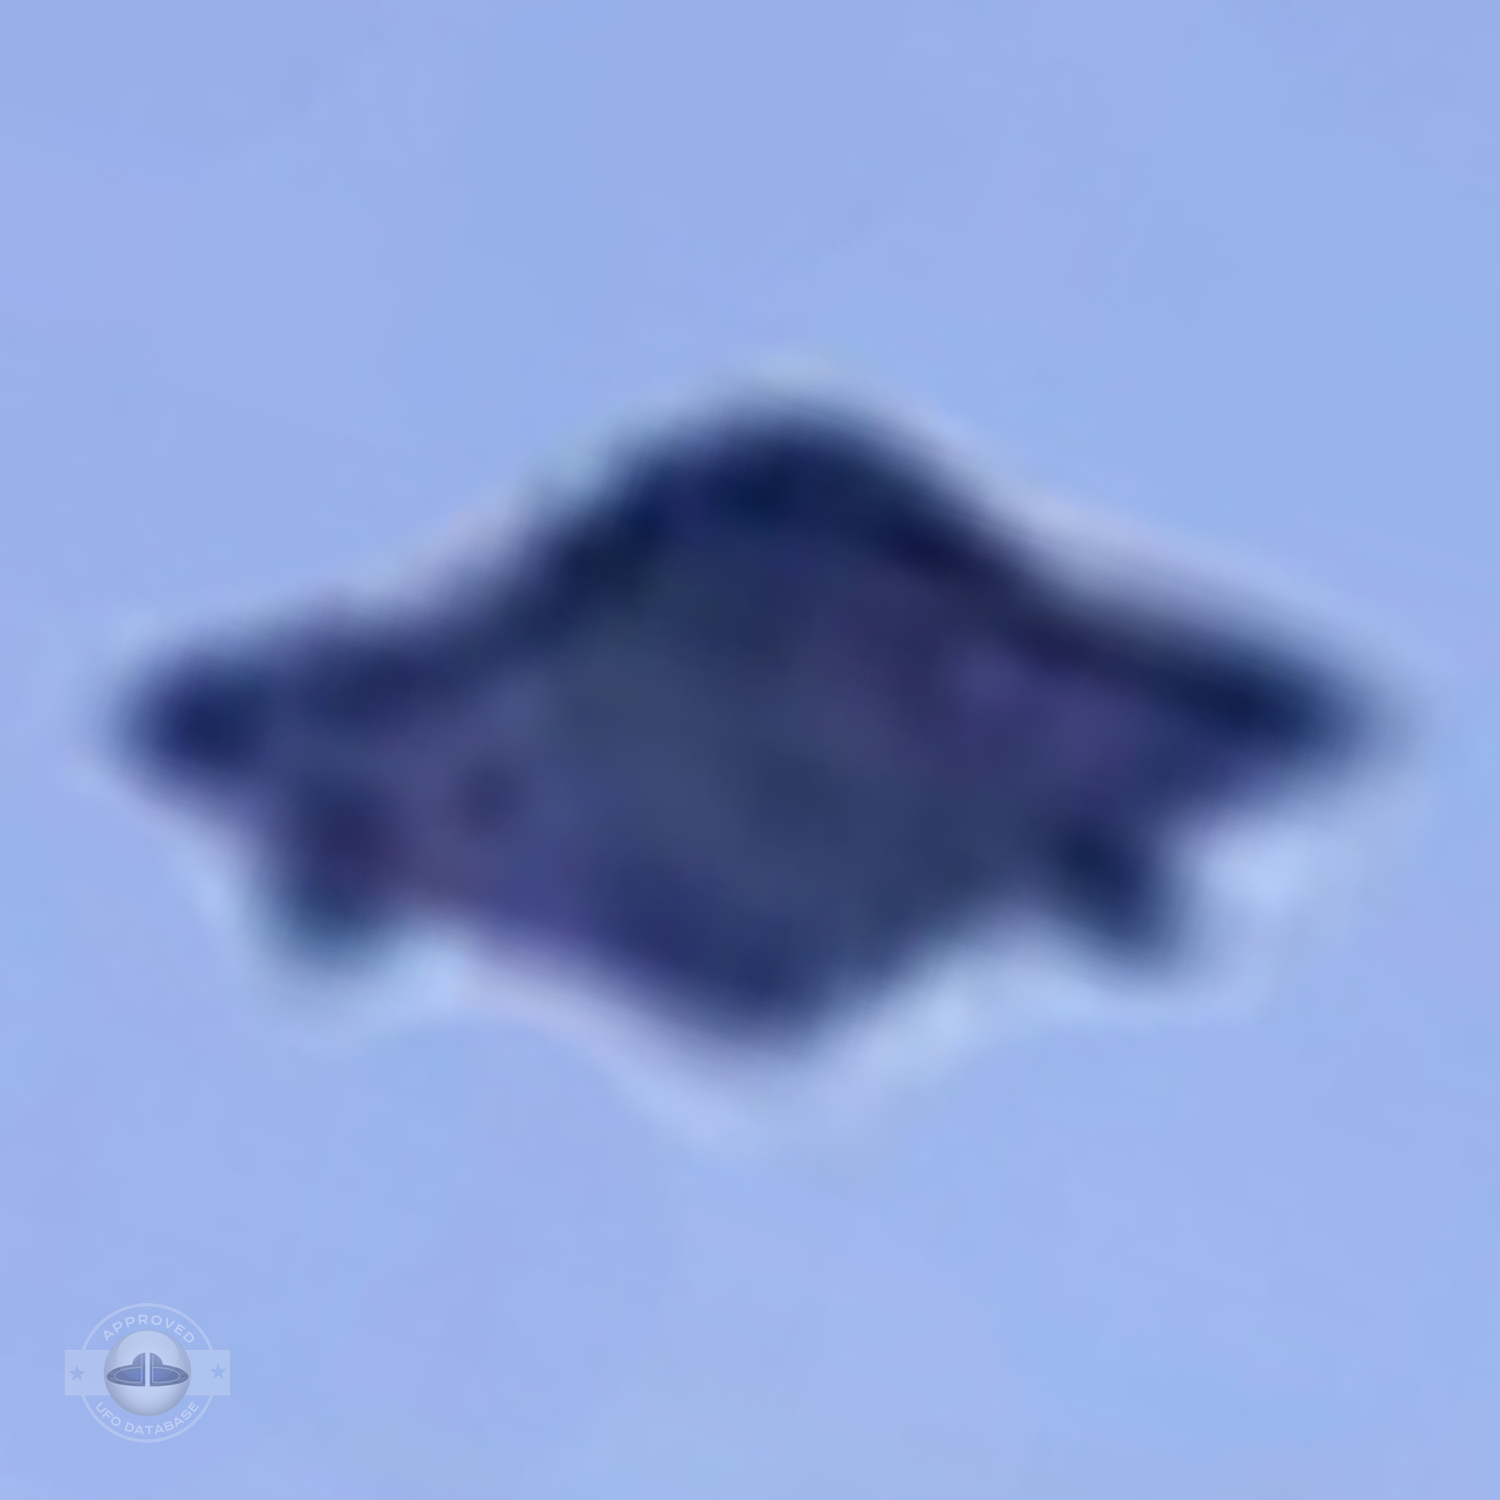 Teen student photograph incredible UFO picture | Koyang, South Korea UFO Picture #197-5